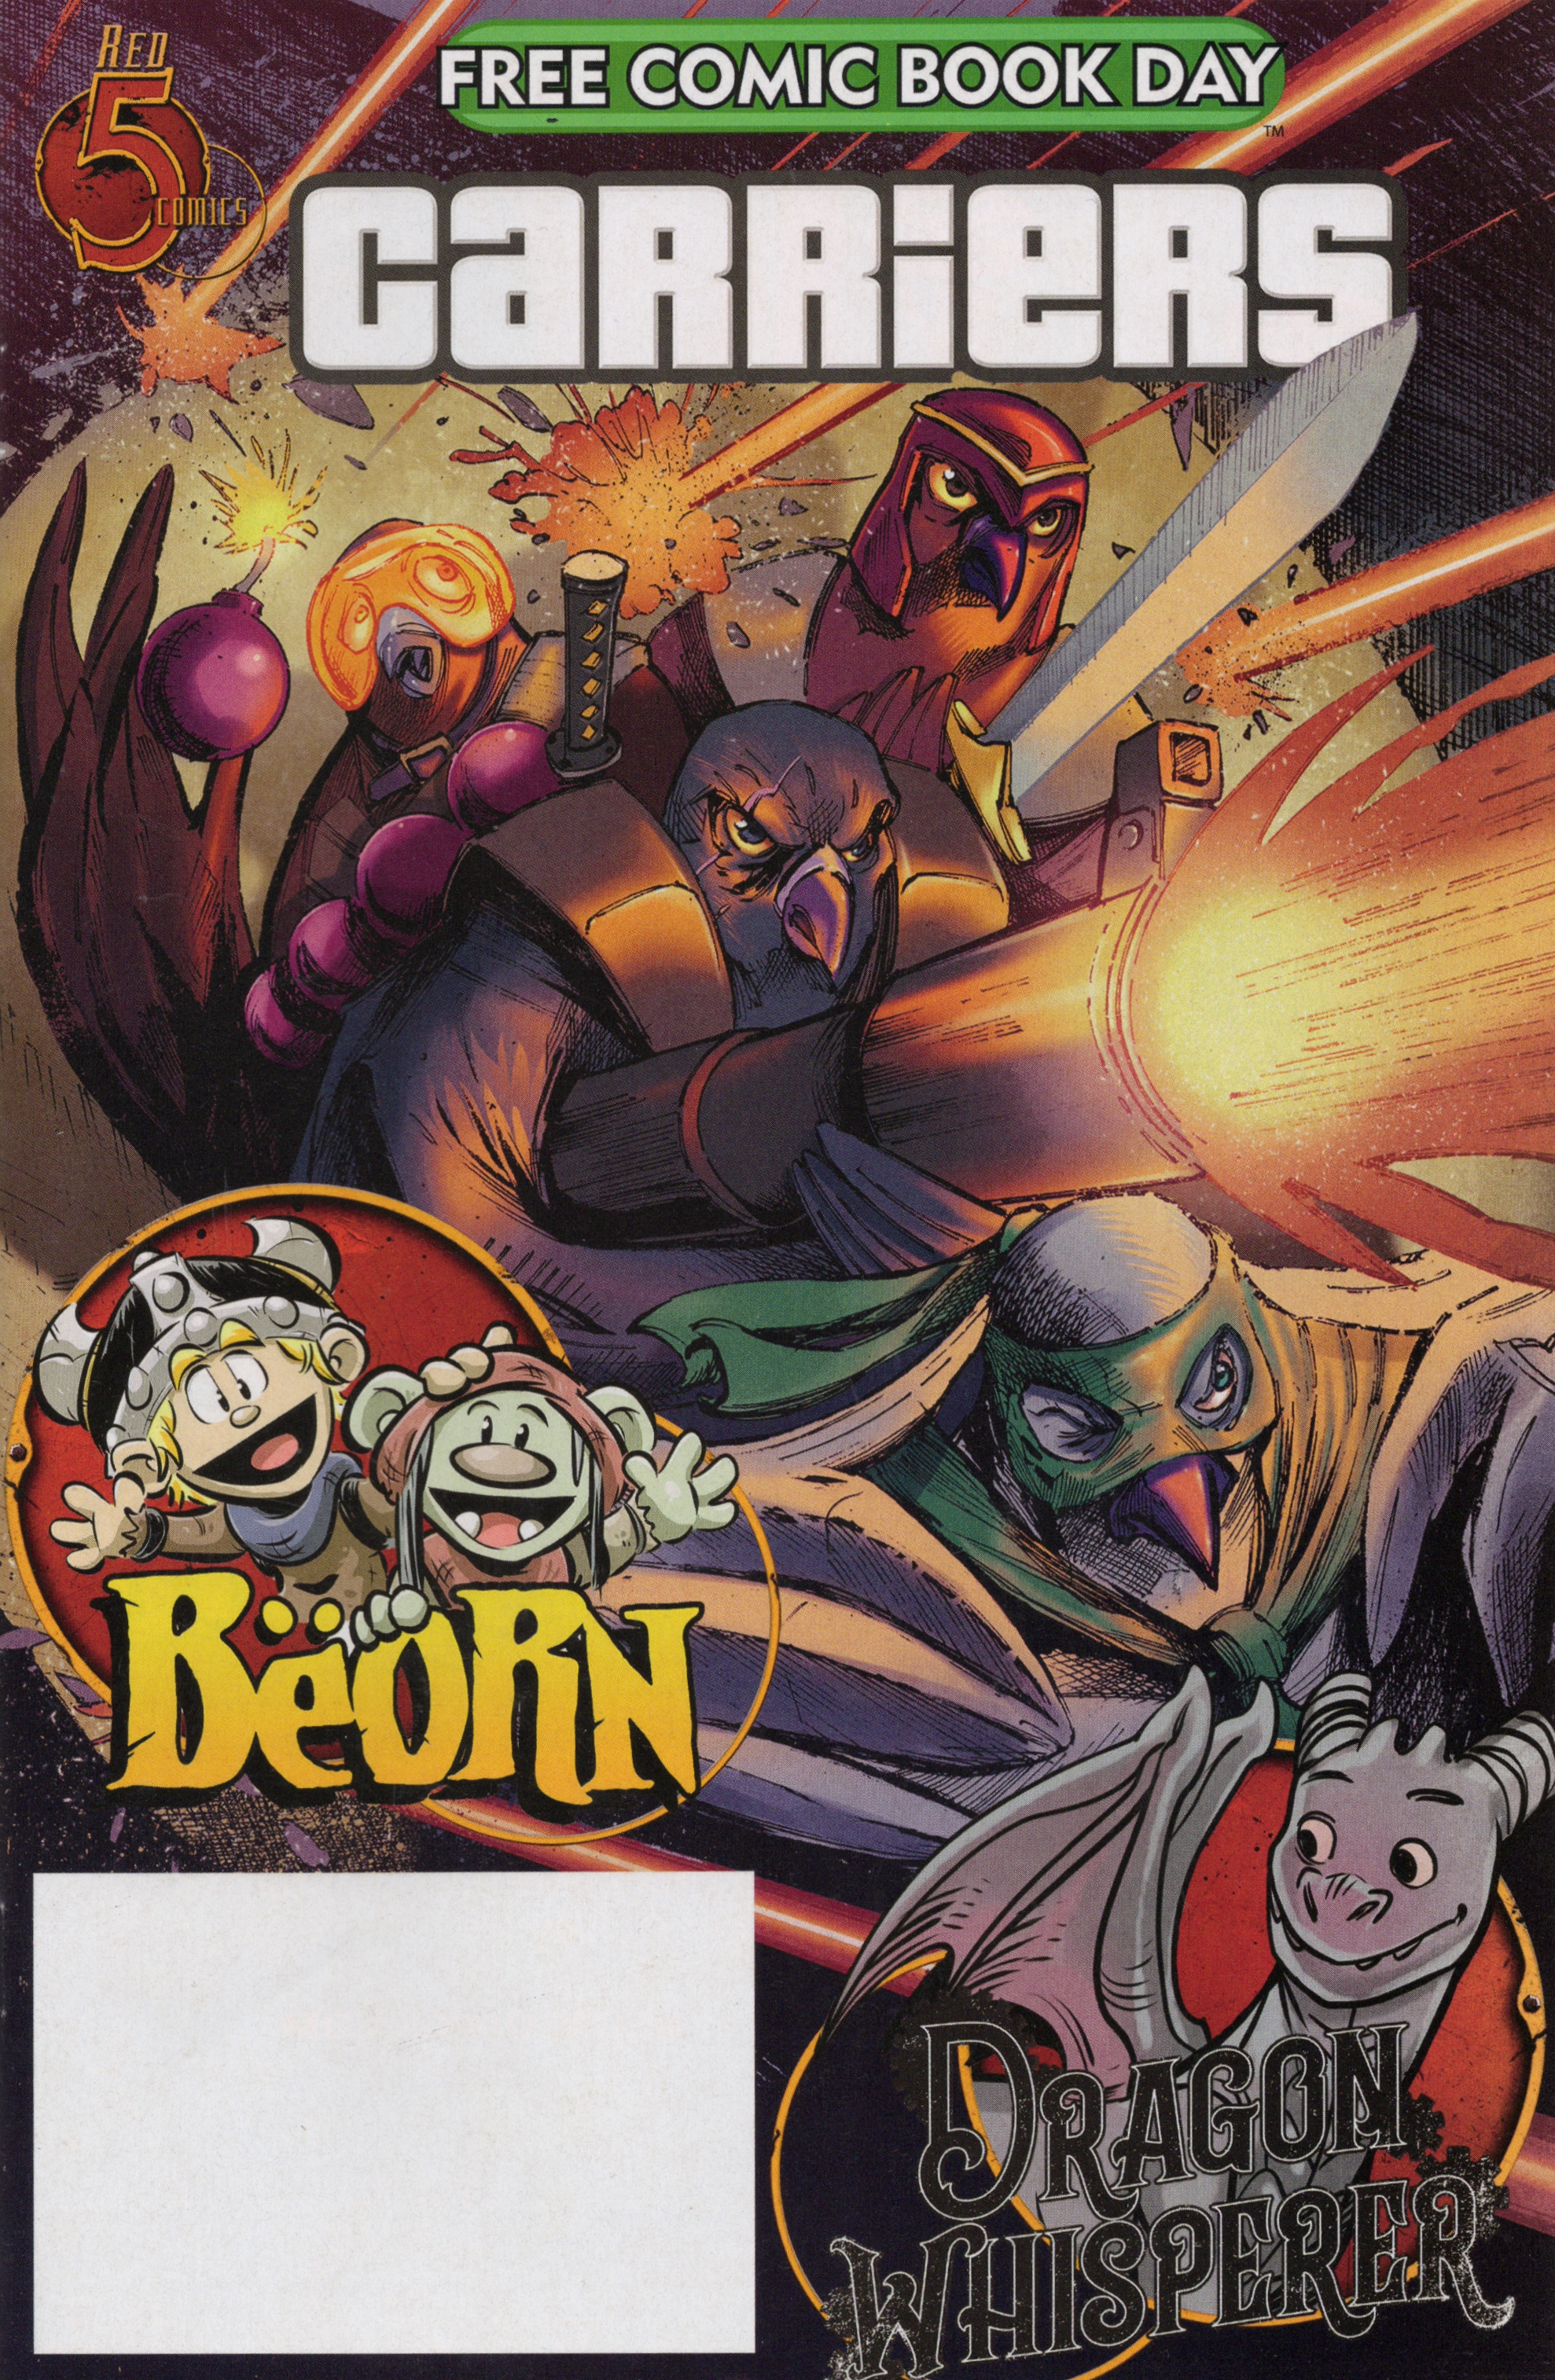 Read online Free Comic Book Day 2022 comic -  Issue # 5 Red Comics Carriers, Beorn and Dragon Whisperer - 1